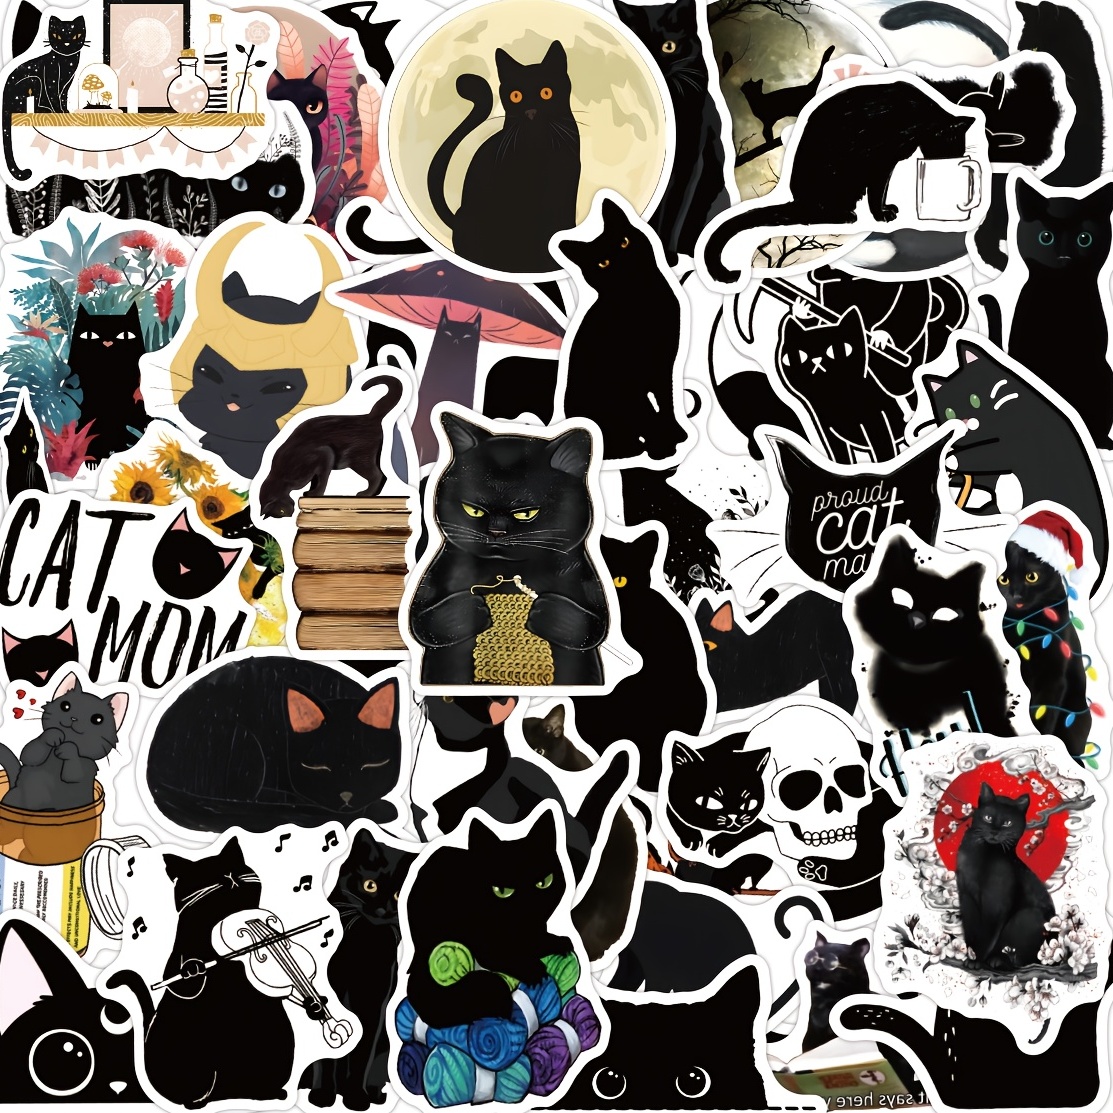 Follow Meowy to travel sticker pack\5 styles in total\hand account